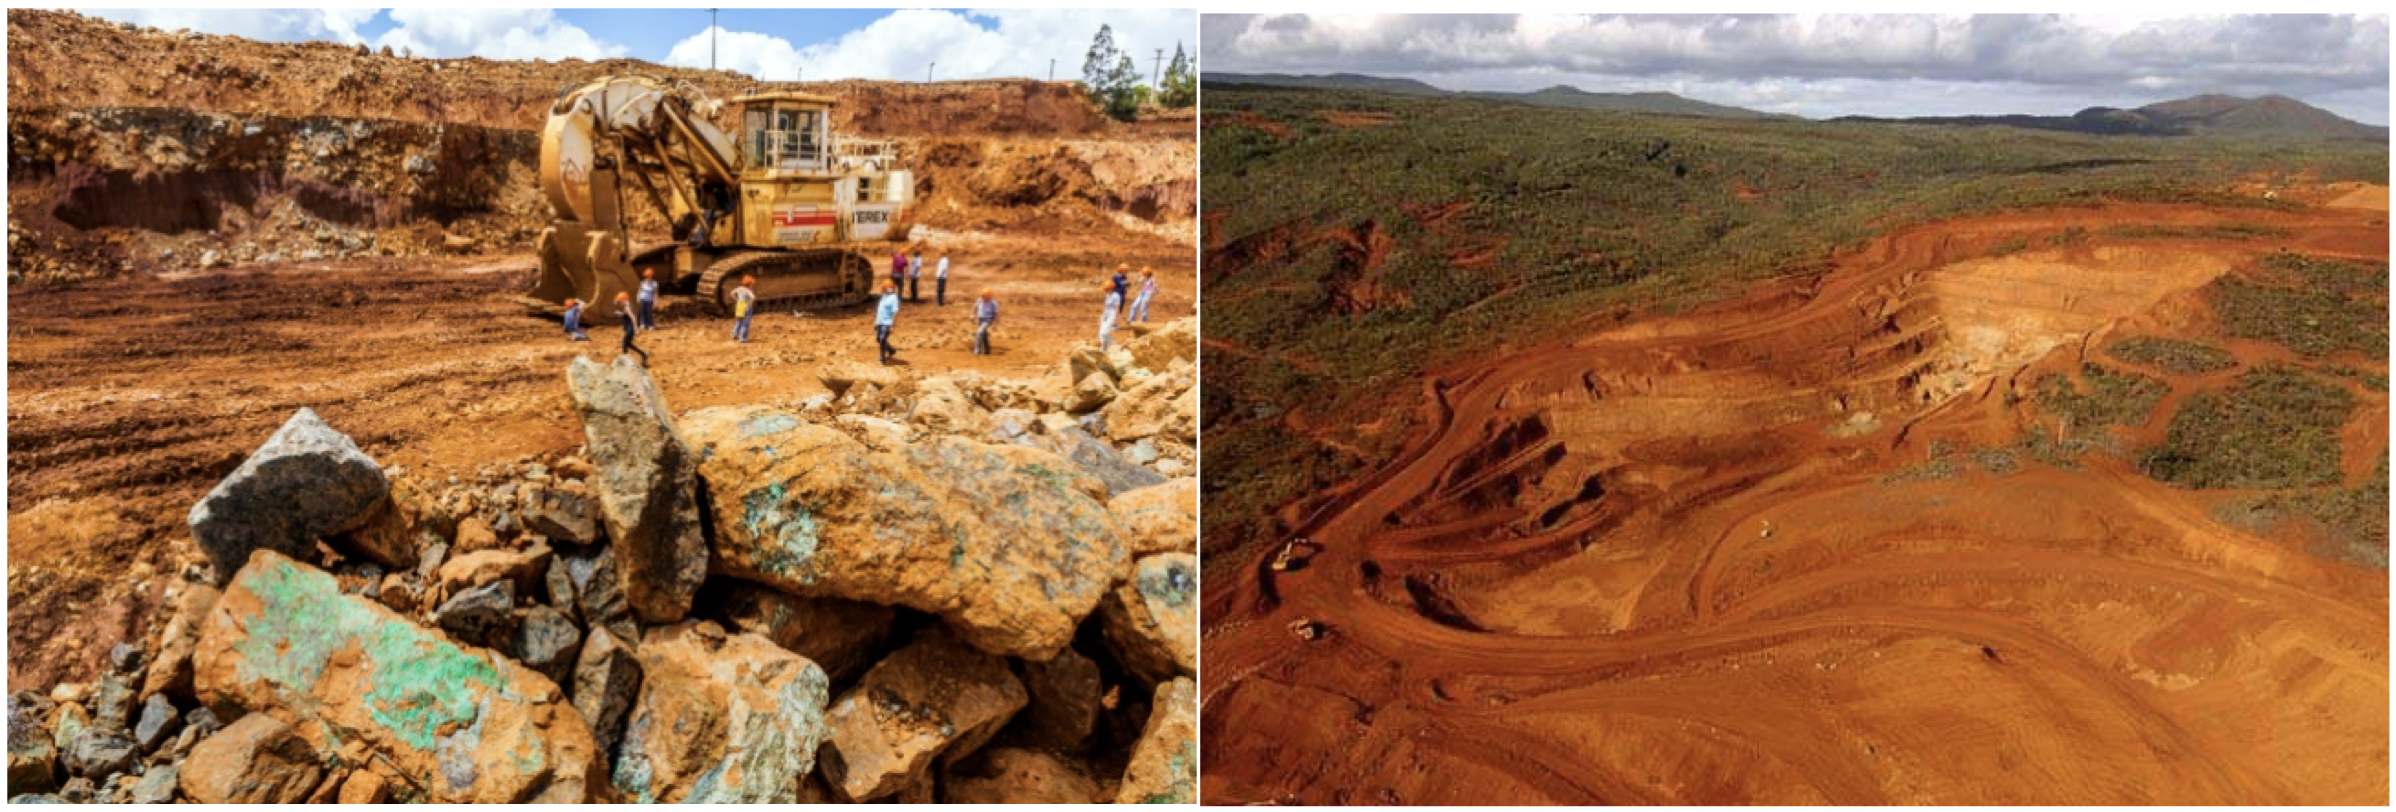 These photos show the typical laterite nickel mining operation.